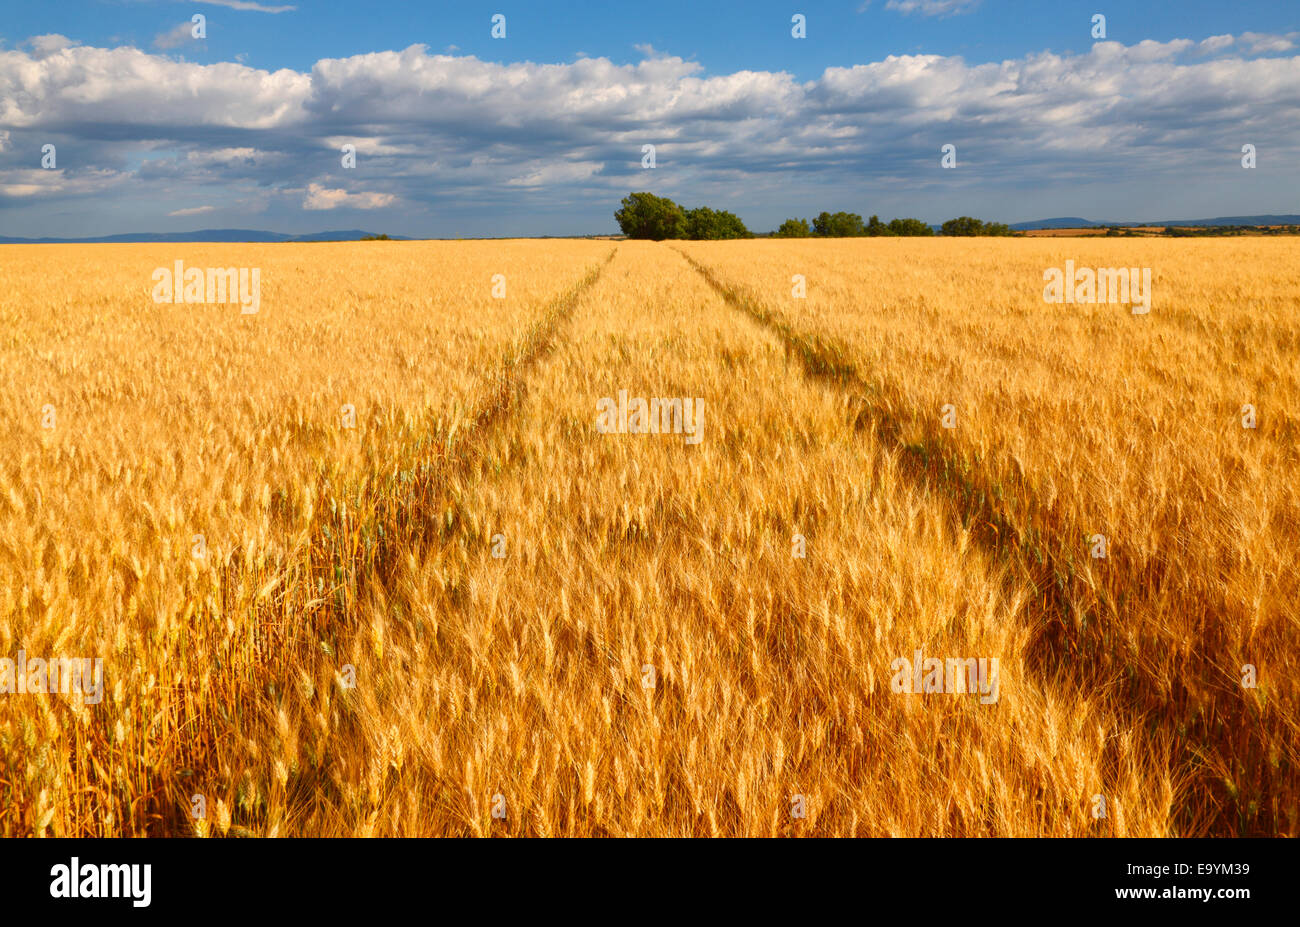 Wheat filed with clouds on the blue sky Stock Photo